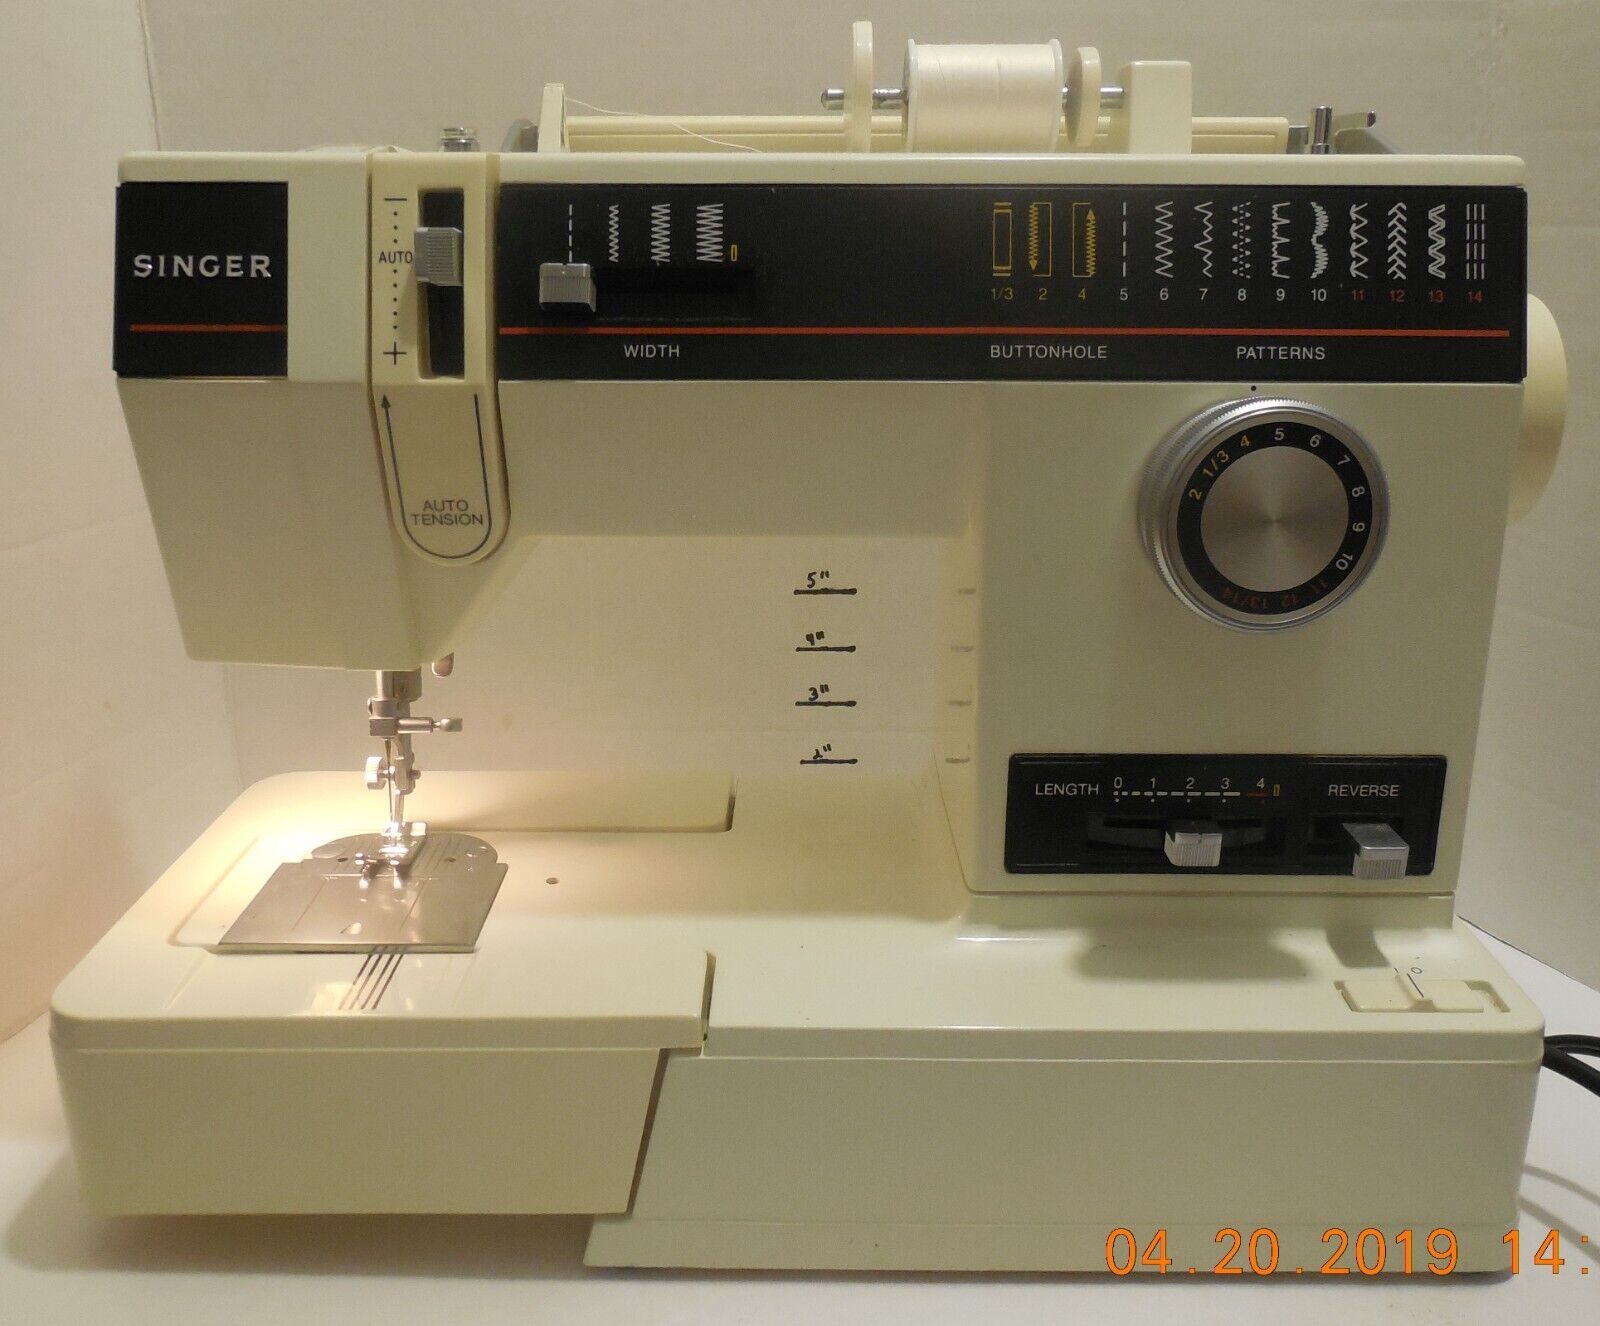 Singer Sewing Machine Model 6233 with Foot pedal - $96.55